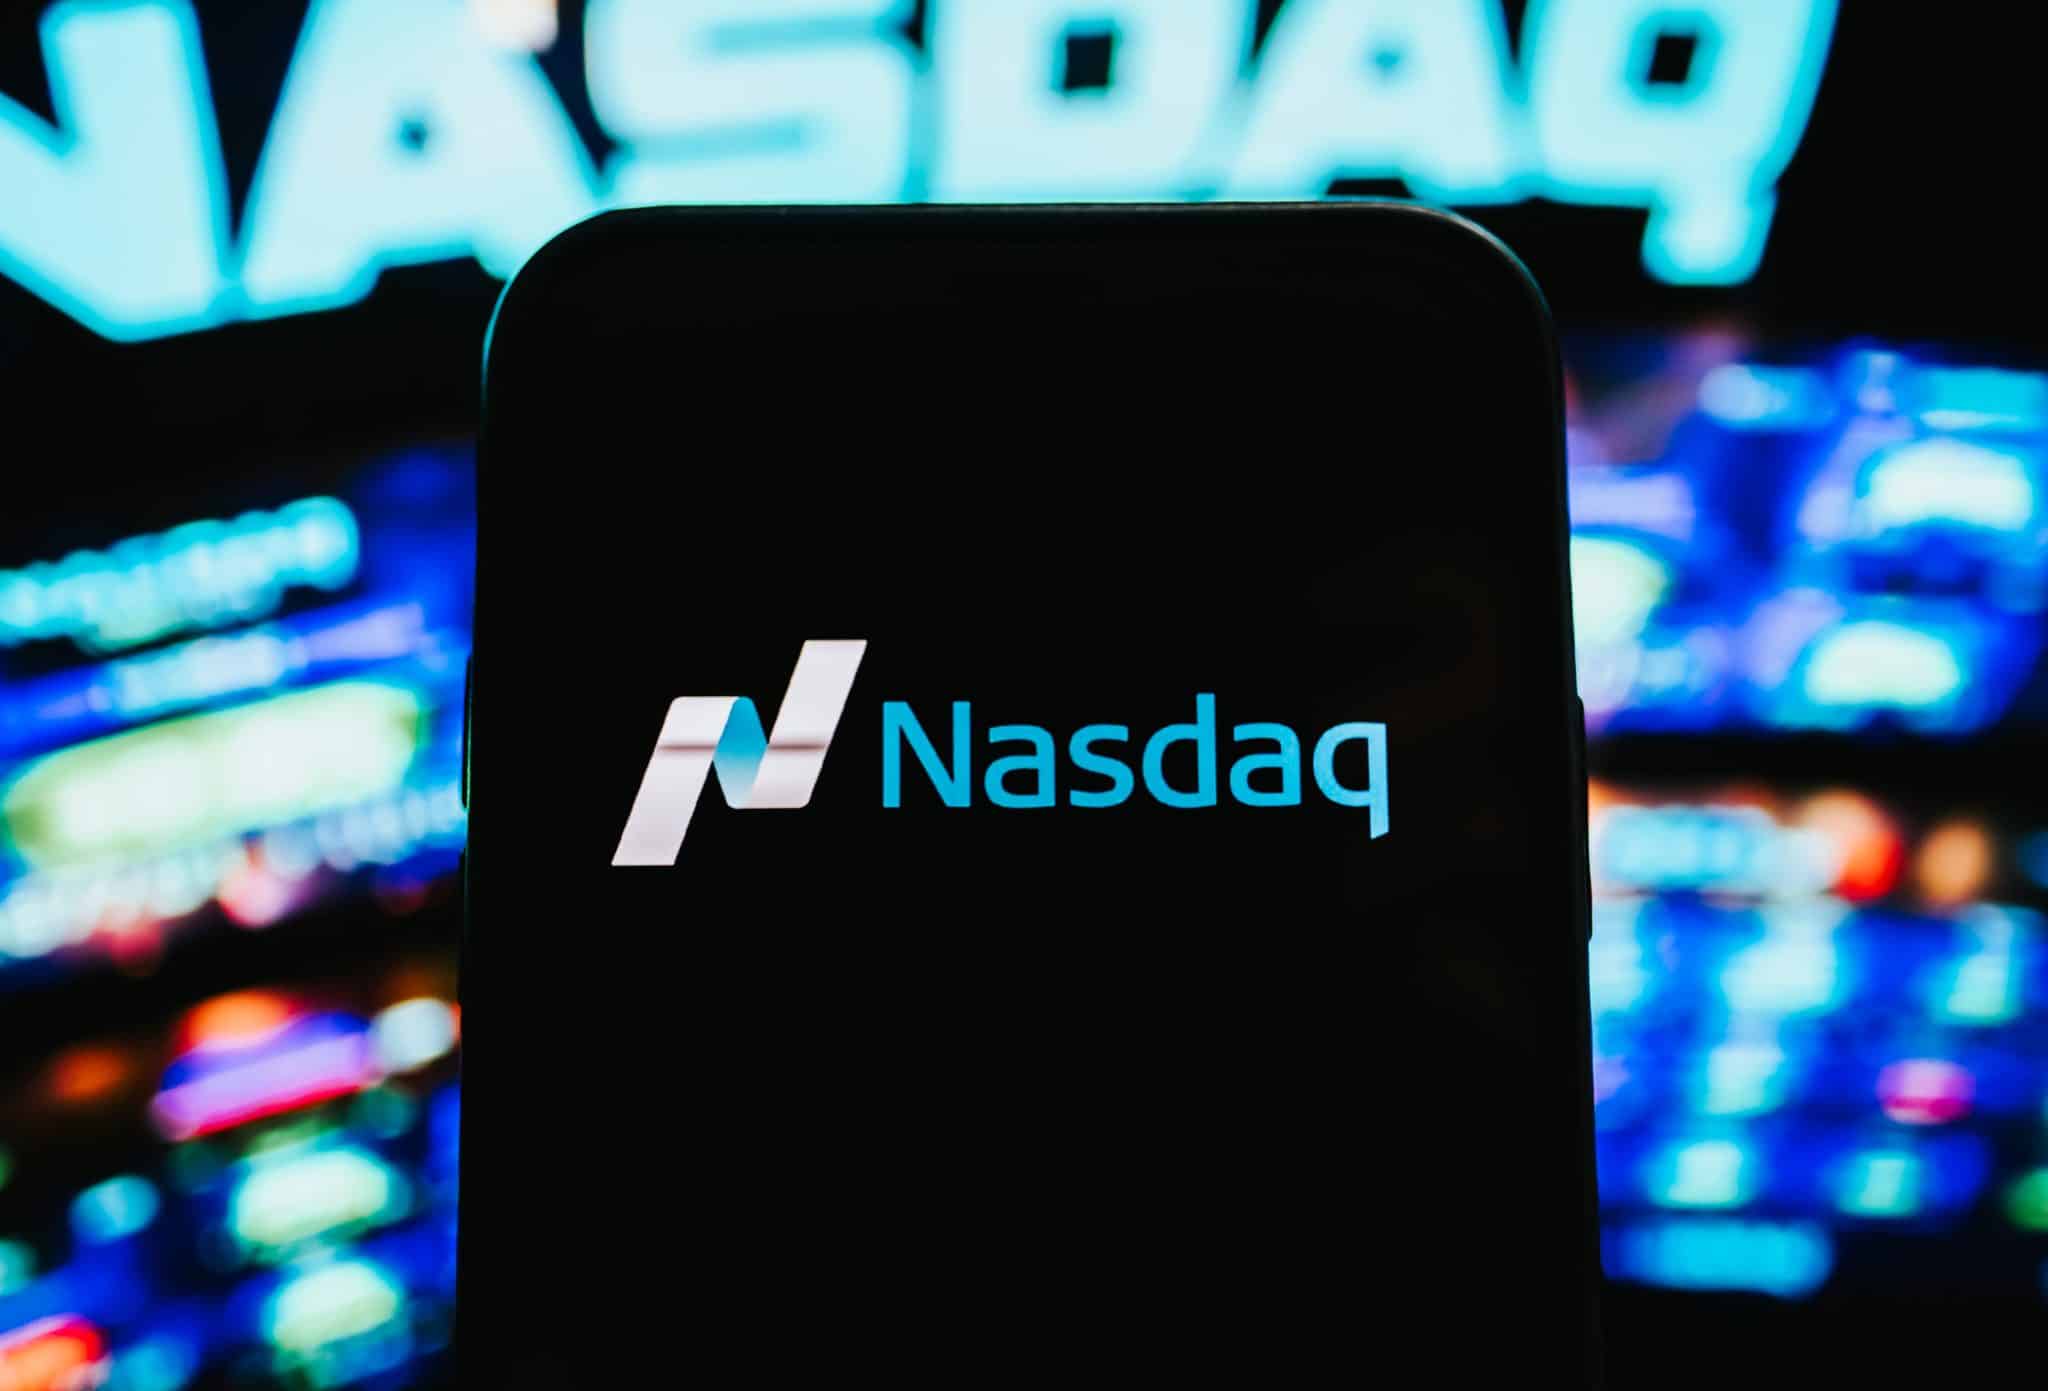 Nasdaq Composite Index soars to all-time high, closing at a record 16,794.88